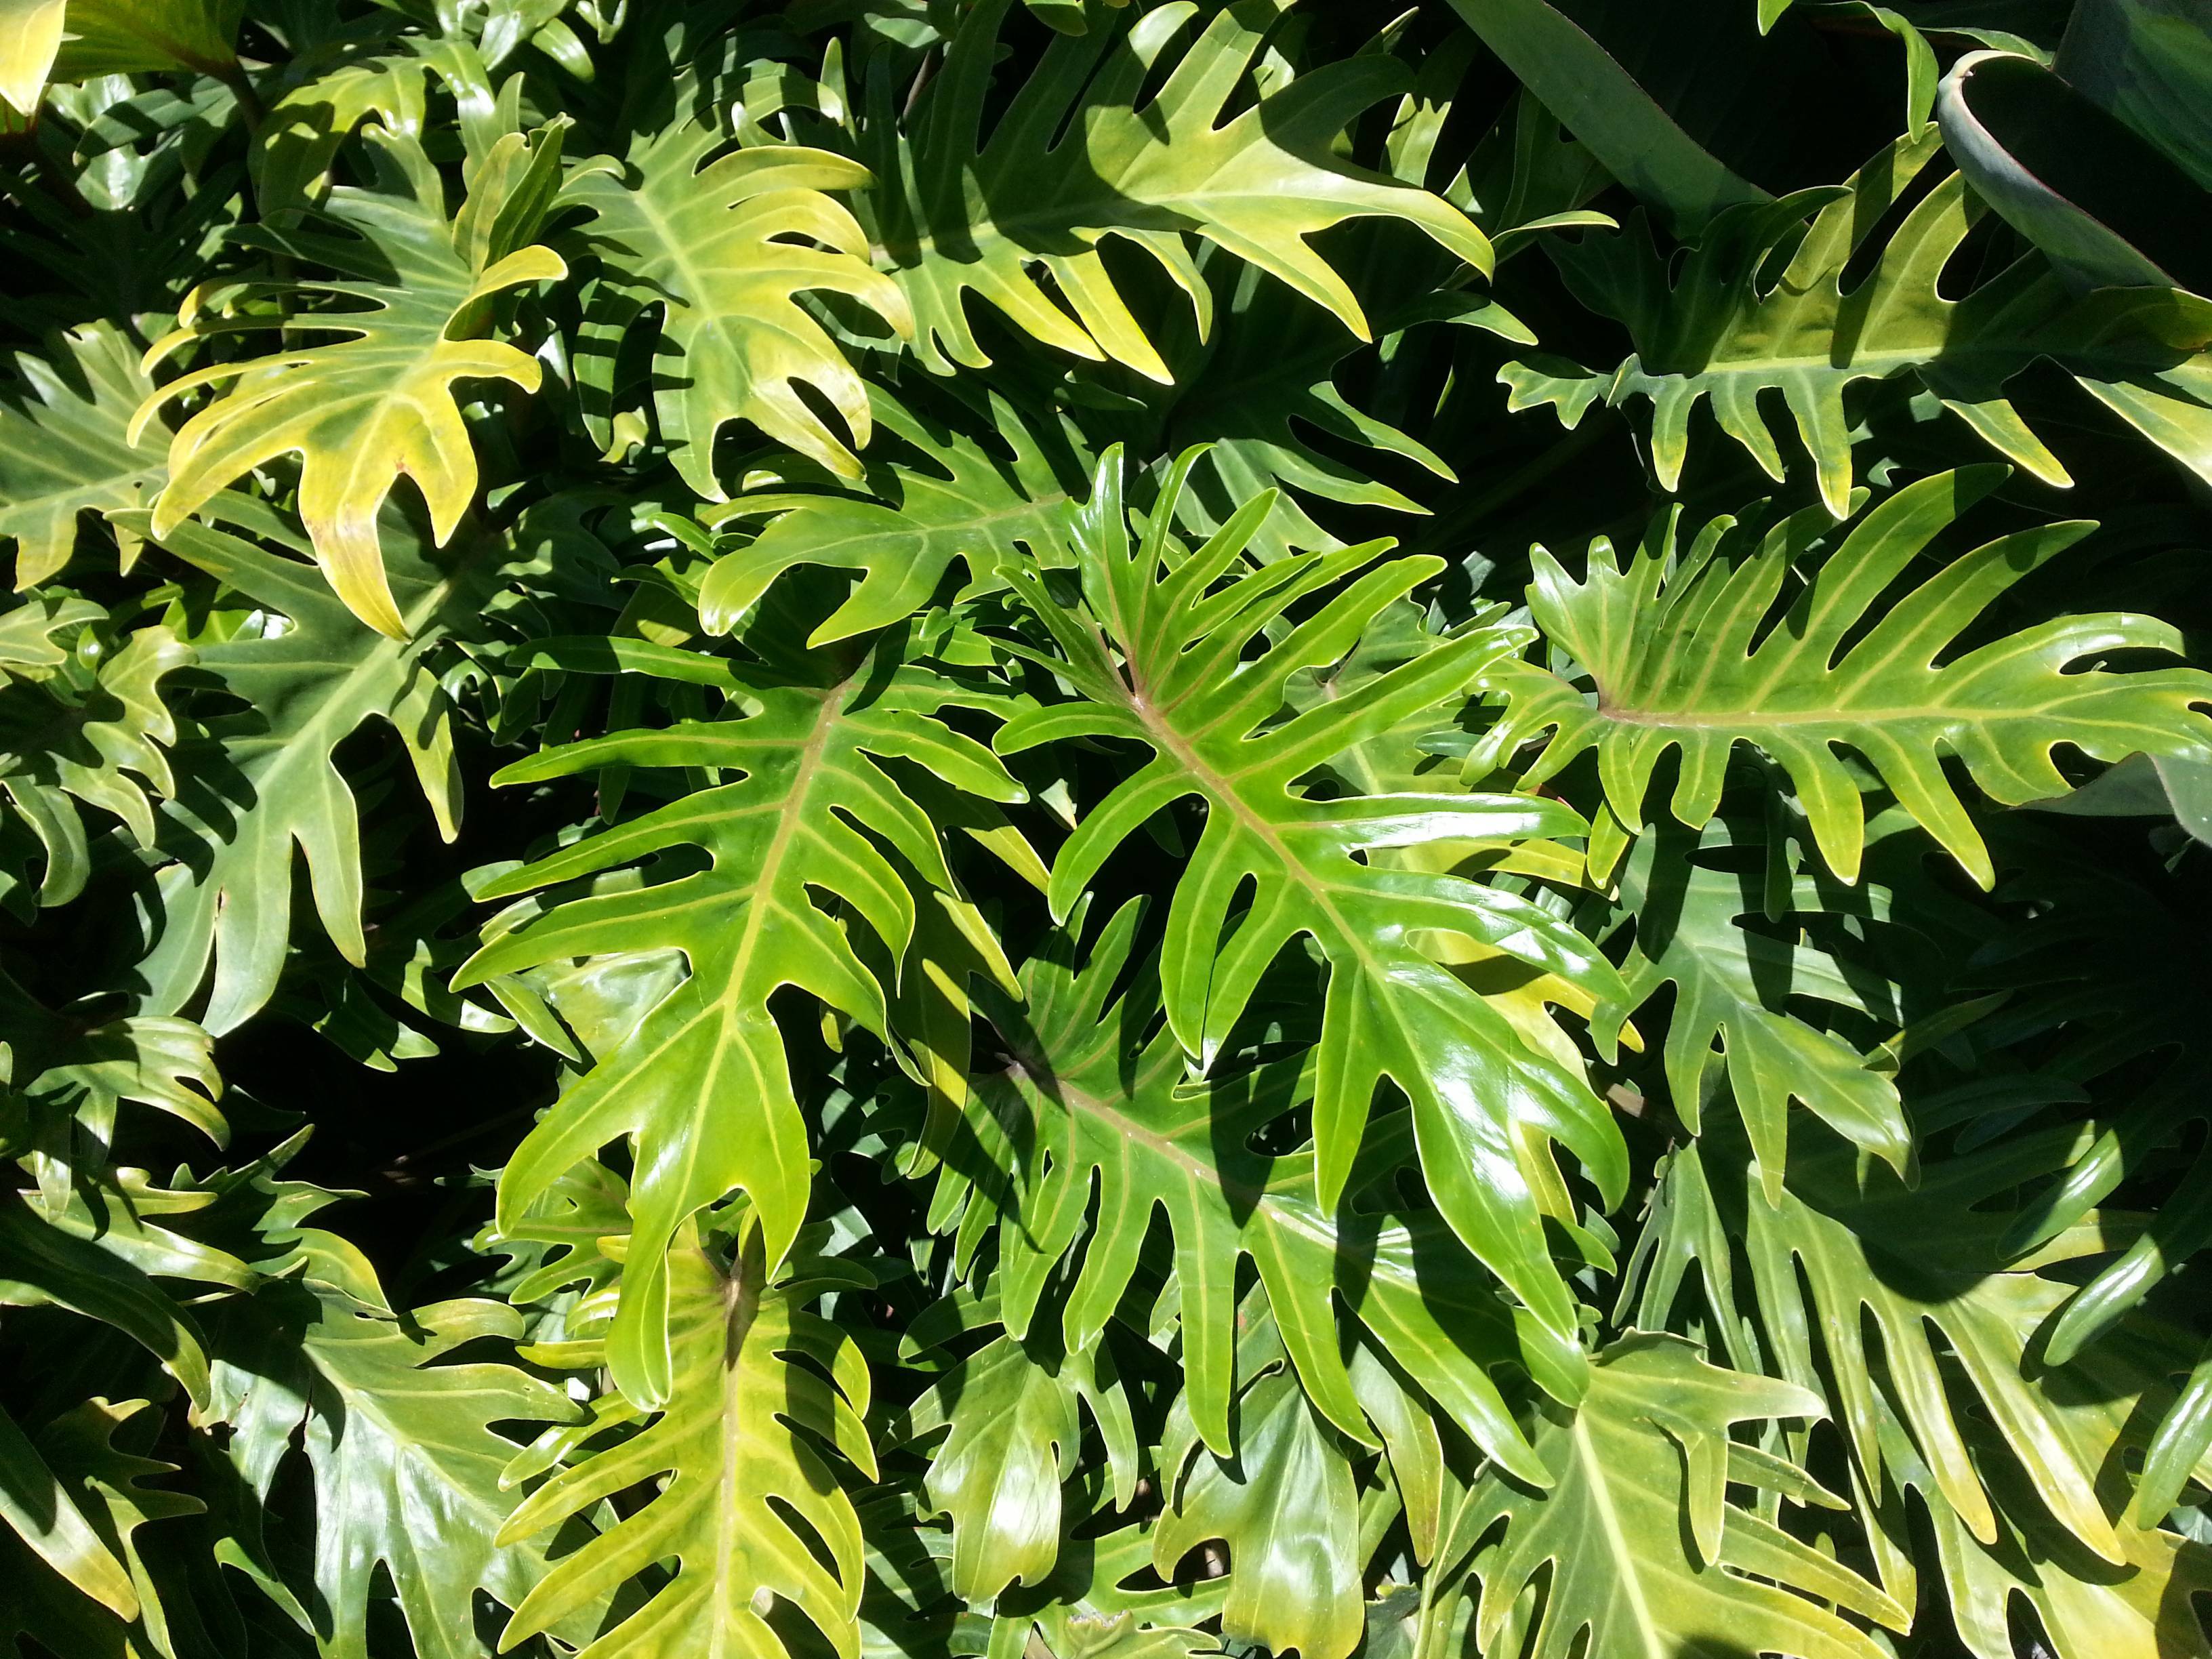 yellow-green leaves with light-brown midribs